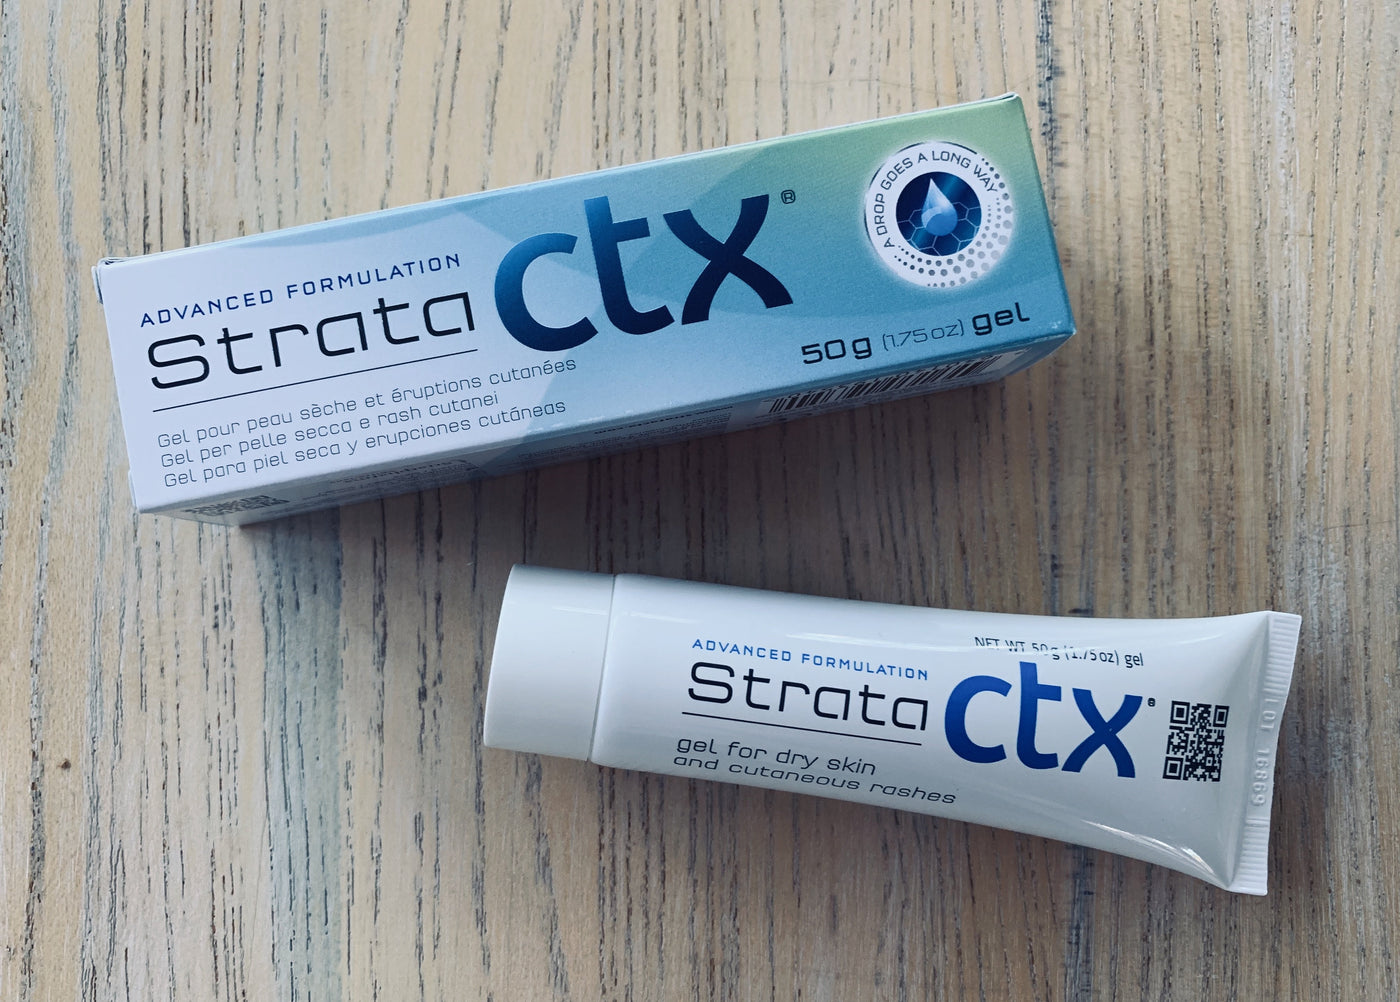 StrataCTX® - Gel for Dry Skin and Cutaneous Rashes - Advanced Formulation